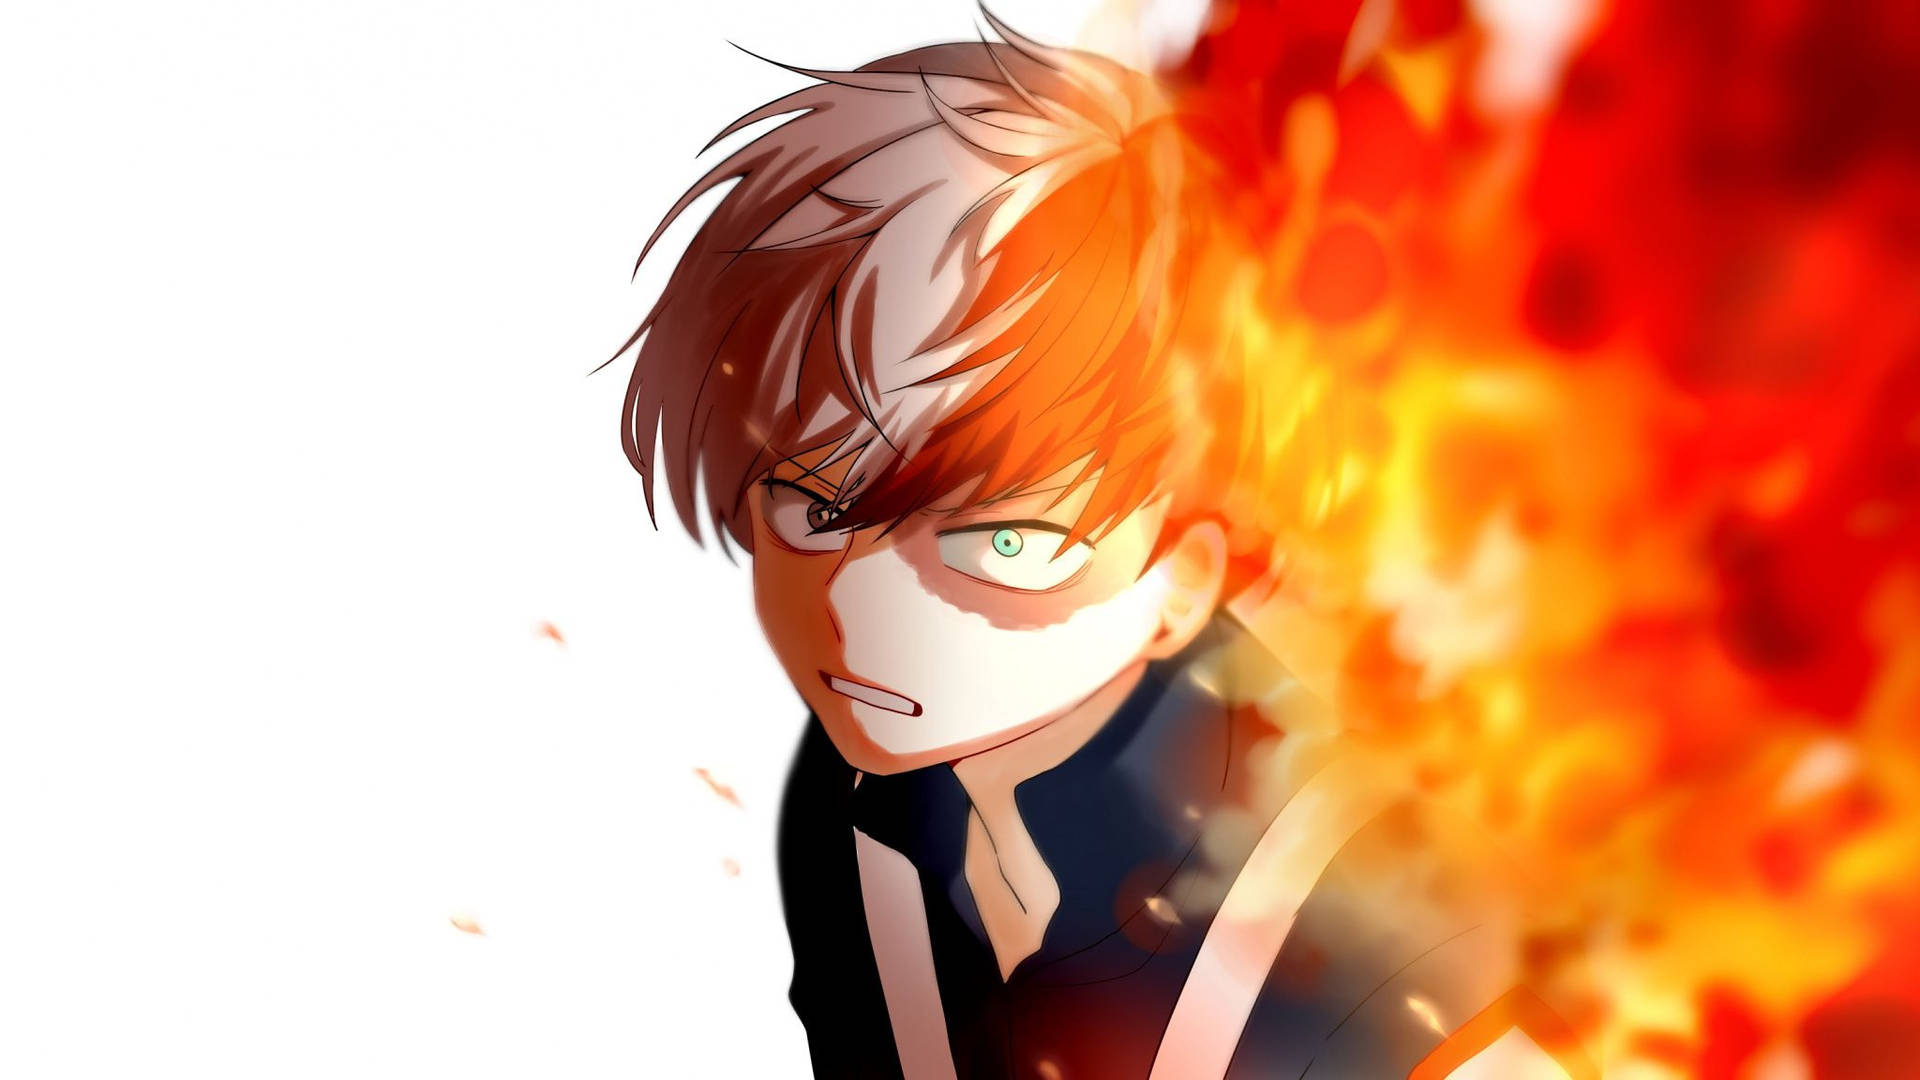 Top 10 Fire Power Users in Anime by HeroCollector16 on DeviantArt